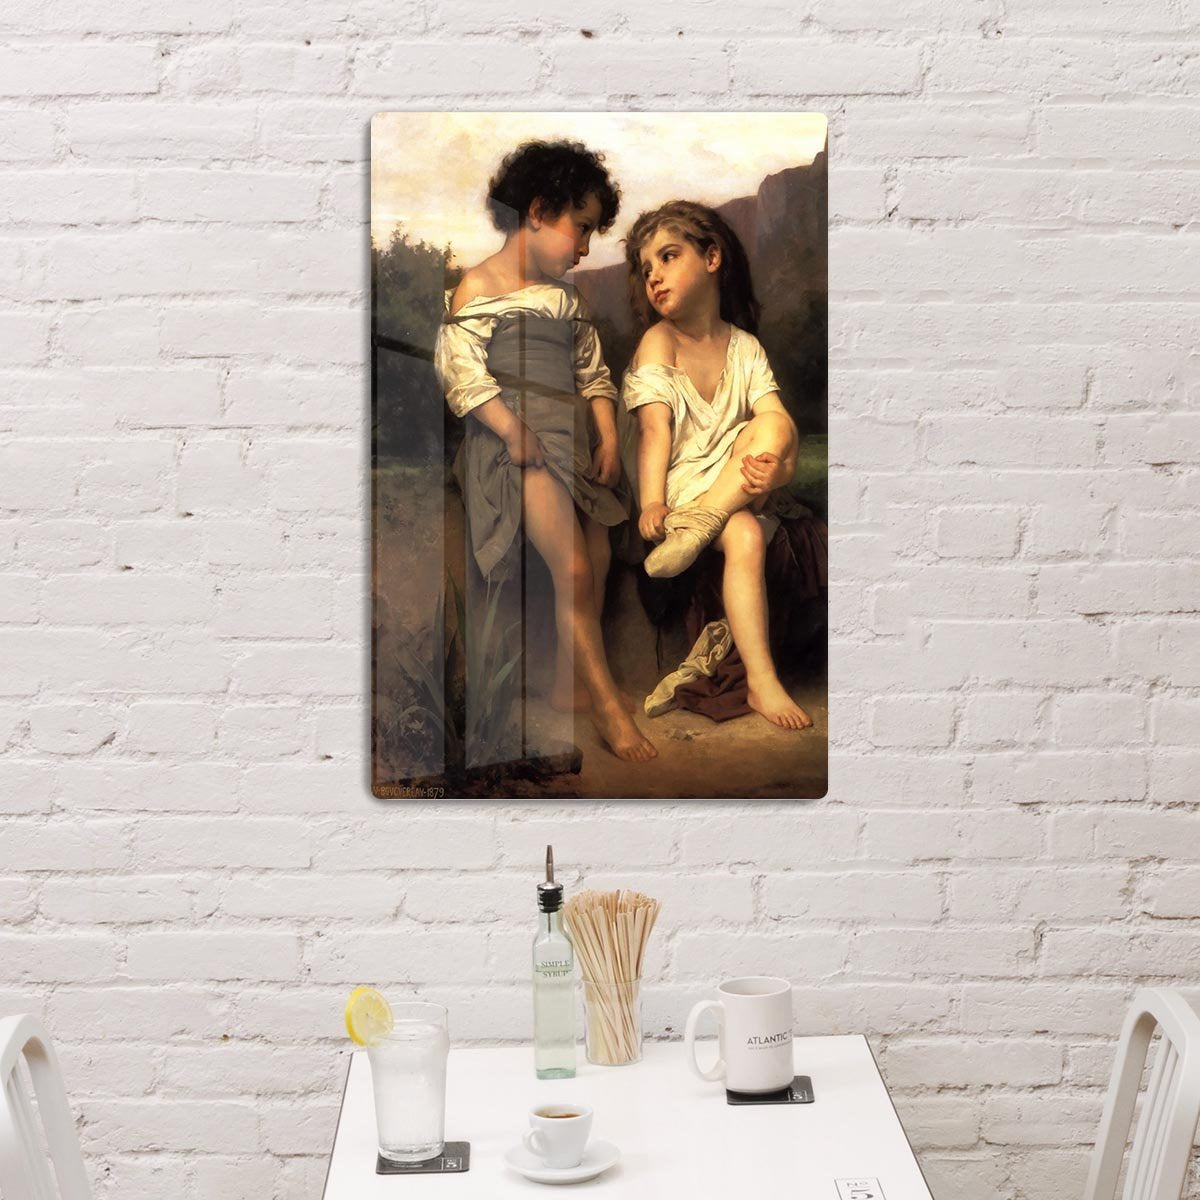 At the Edge of the Brook By Bouguereau HD Metal Print